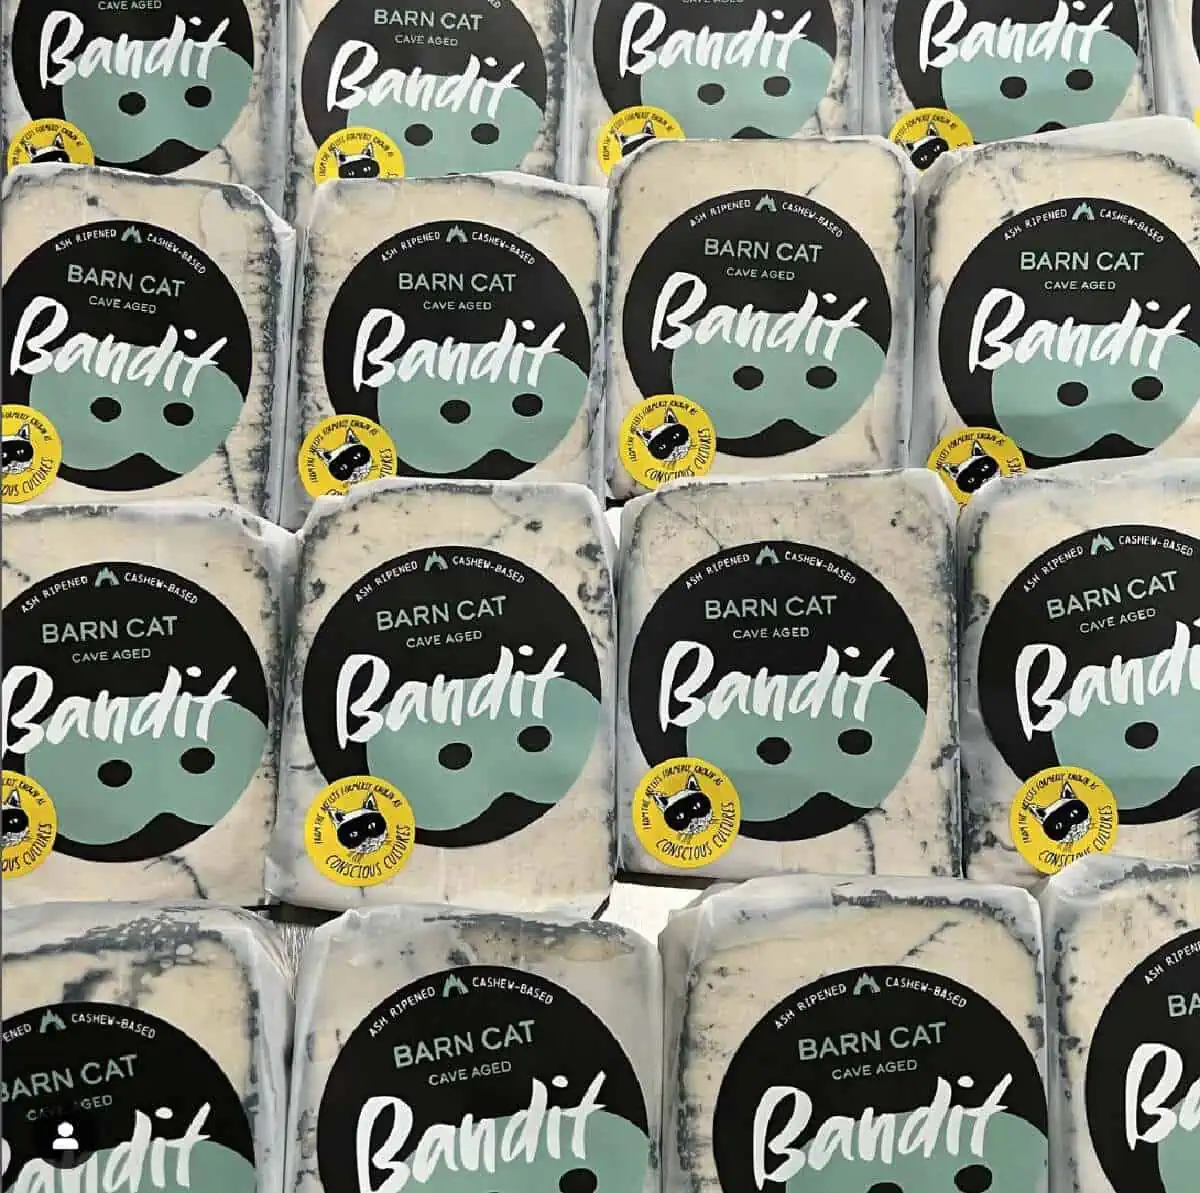 Sixteen square packages of Bandit Barn Cat Bleu Cheese in a checkerboard pattern with dark blue and pale green labels.